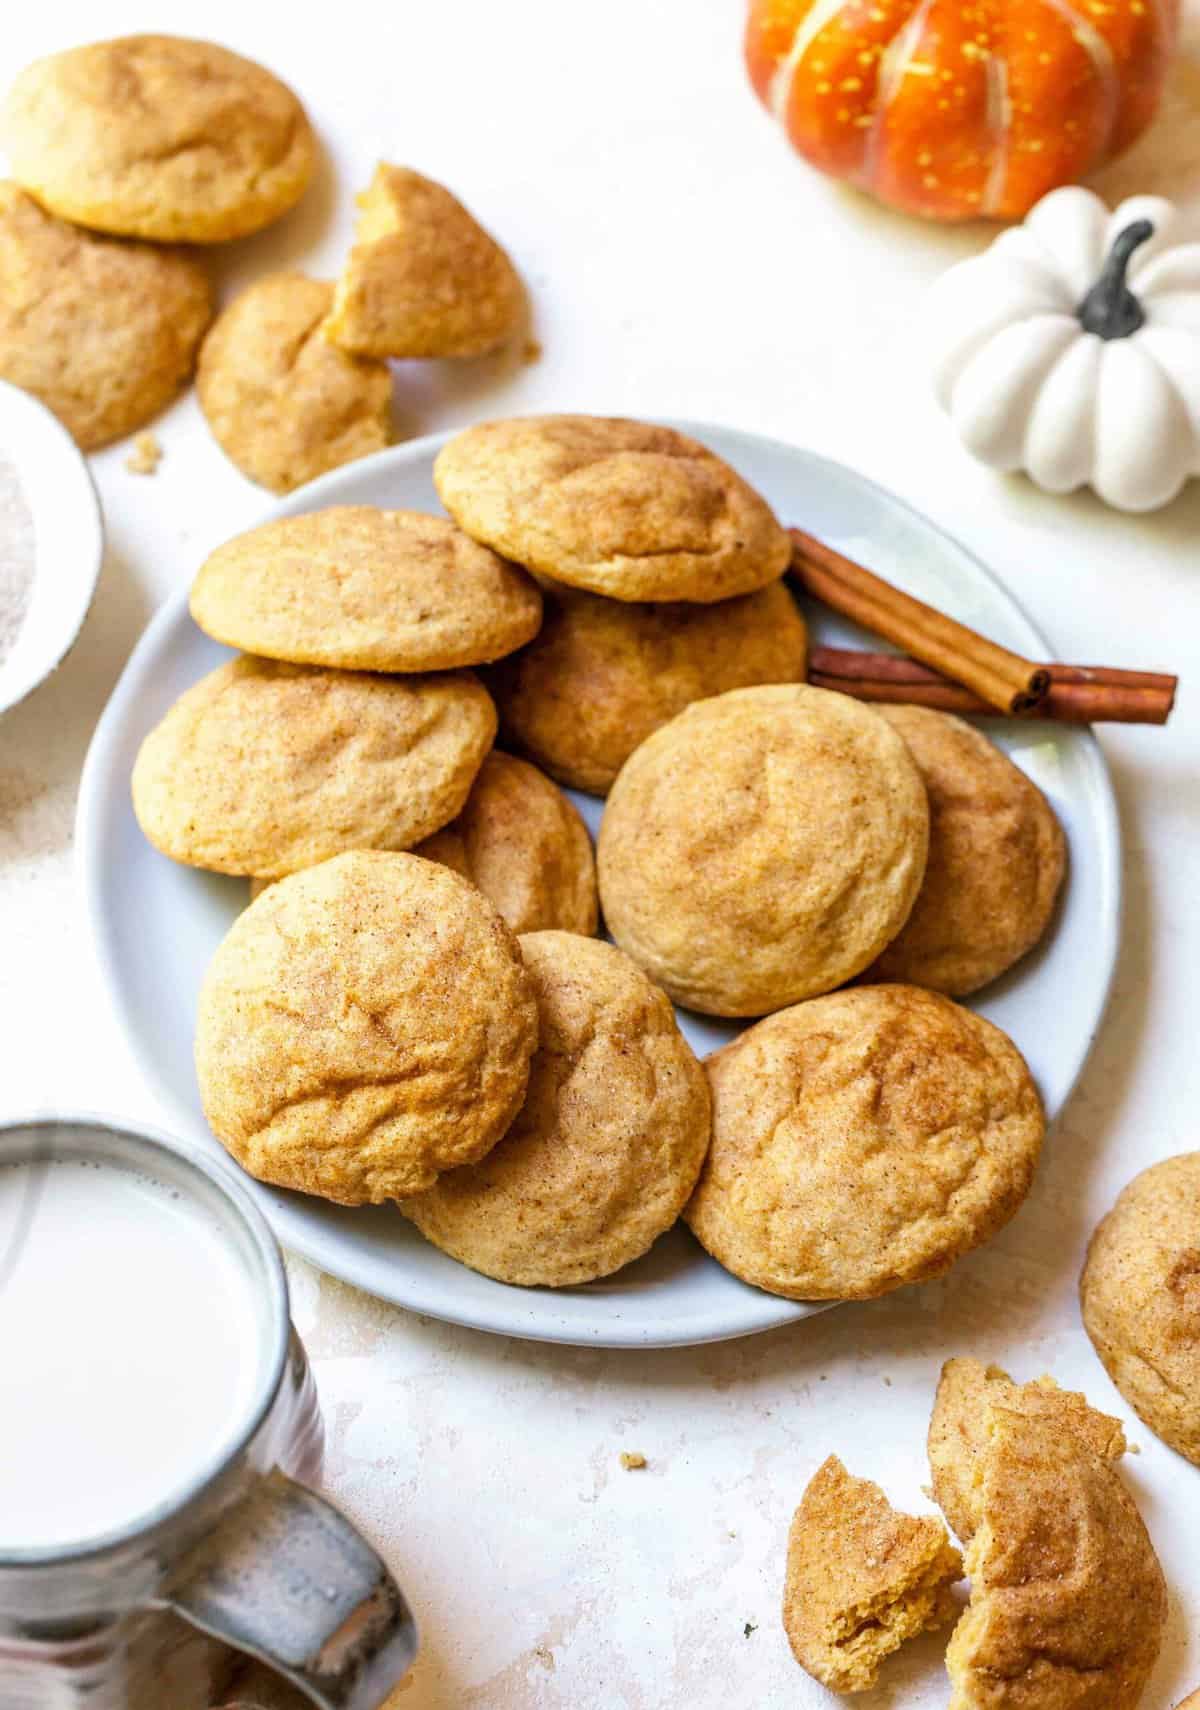 Pumpkin spice snickerdoodles are the perfect Fall dessert! They're a Fall twist on the classic snickerdoodle and absolutely heavenly!